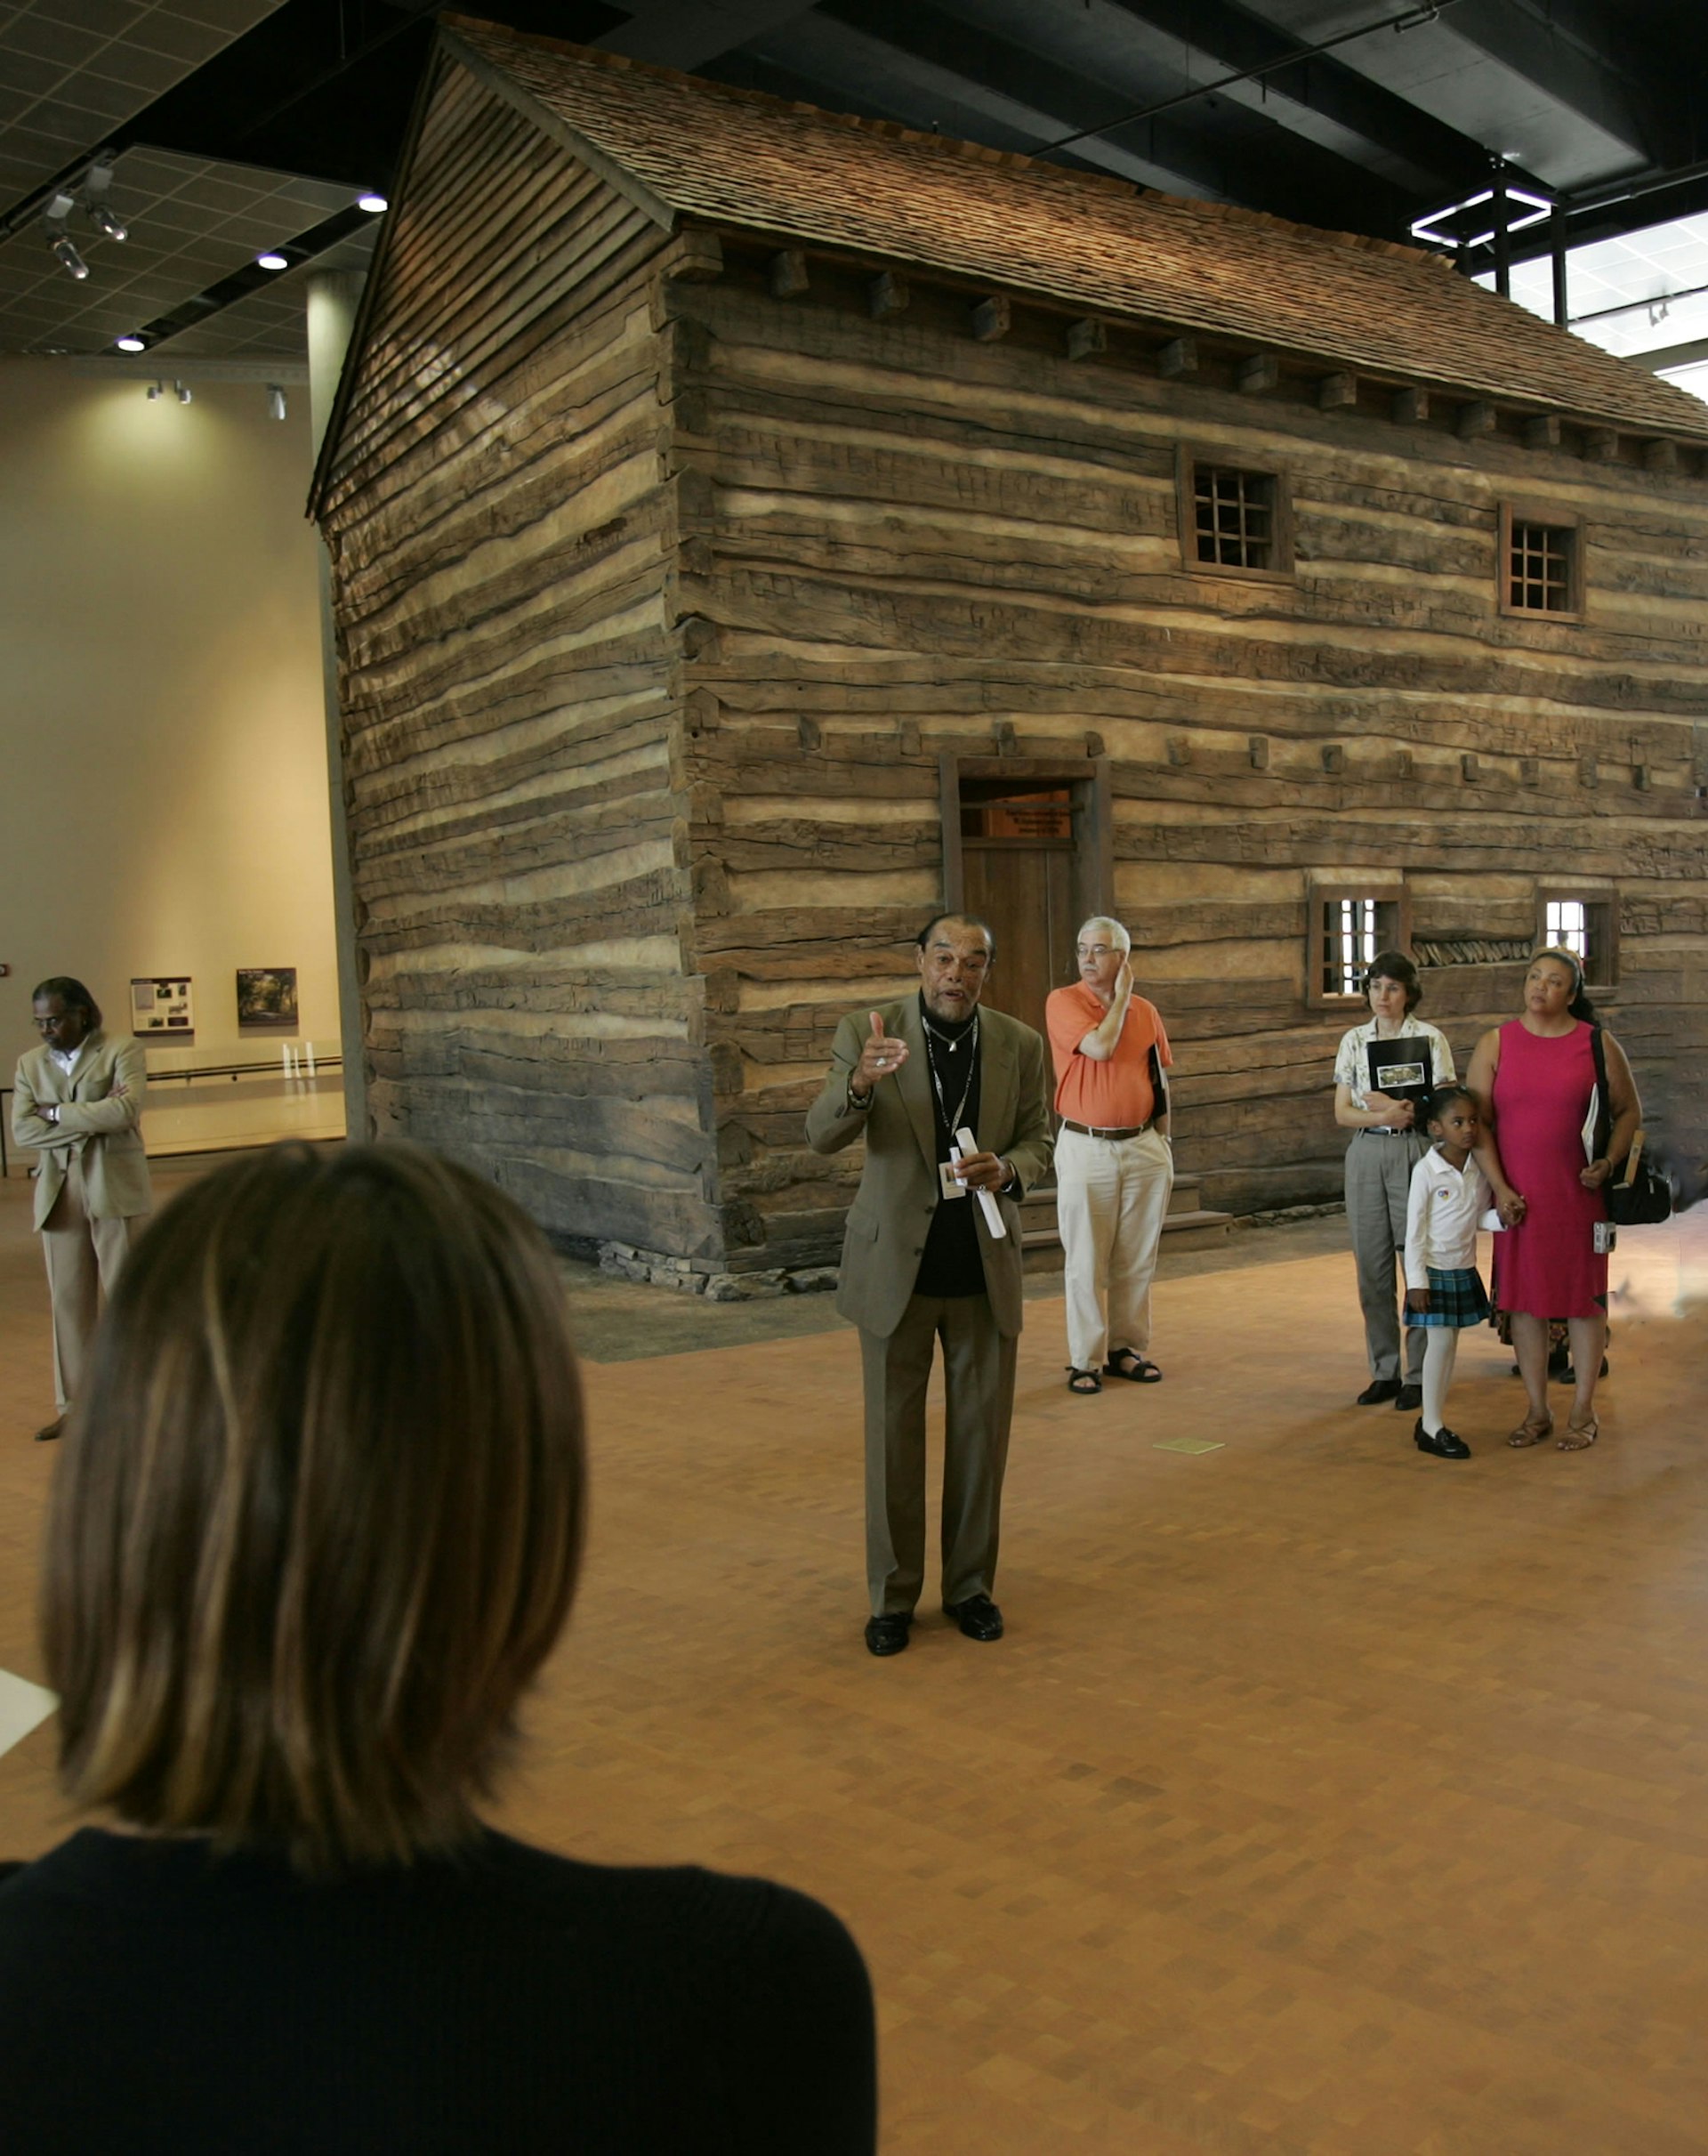 a man stands in front of a log cabin inside the National Underground Railroad Freedom Center in Cincinnati